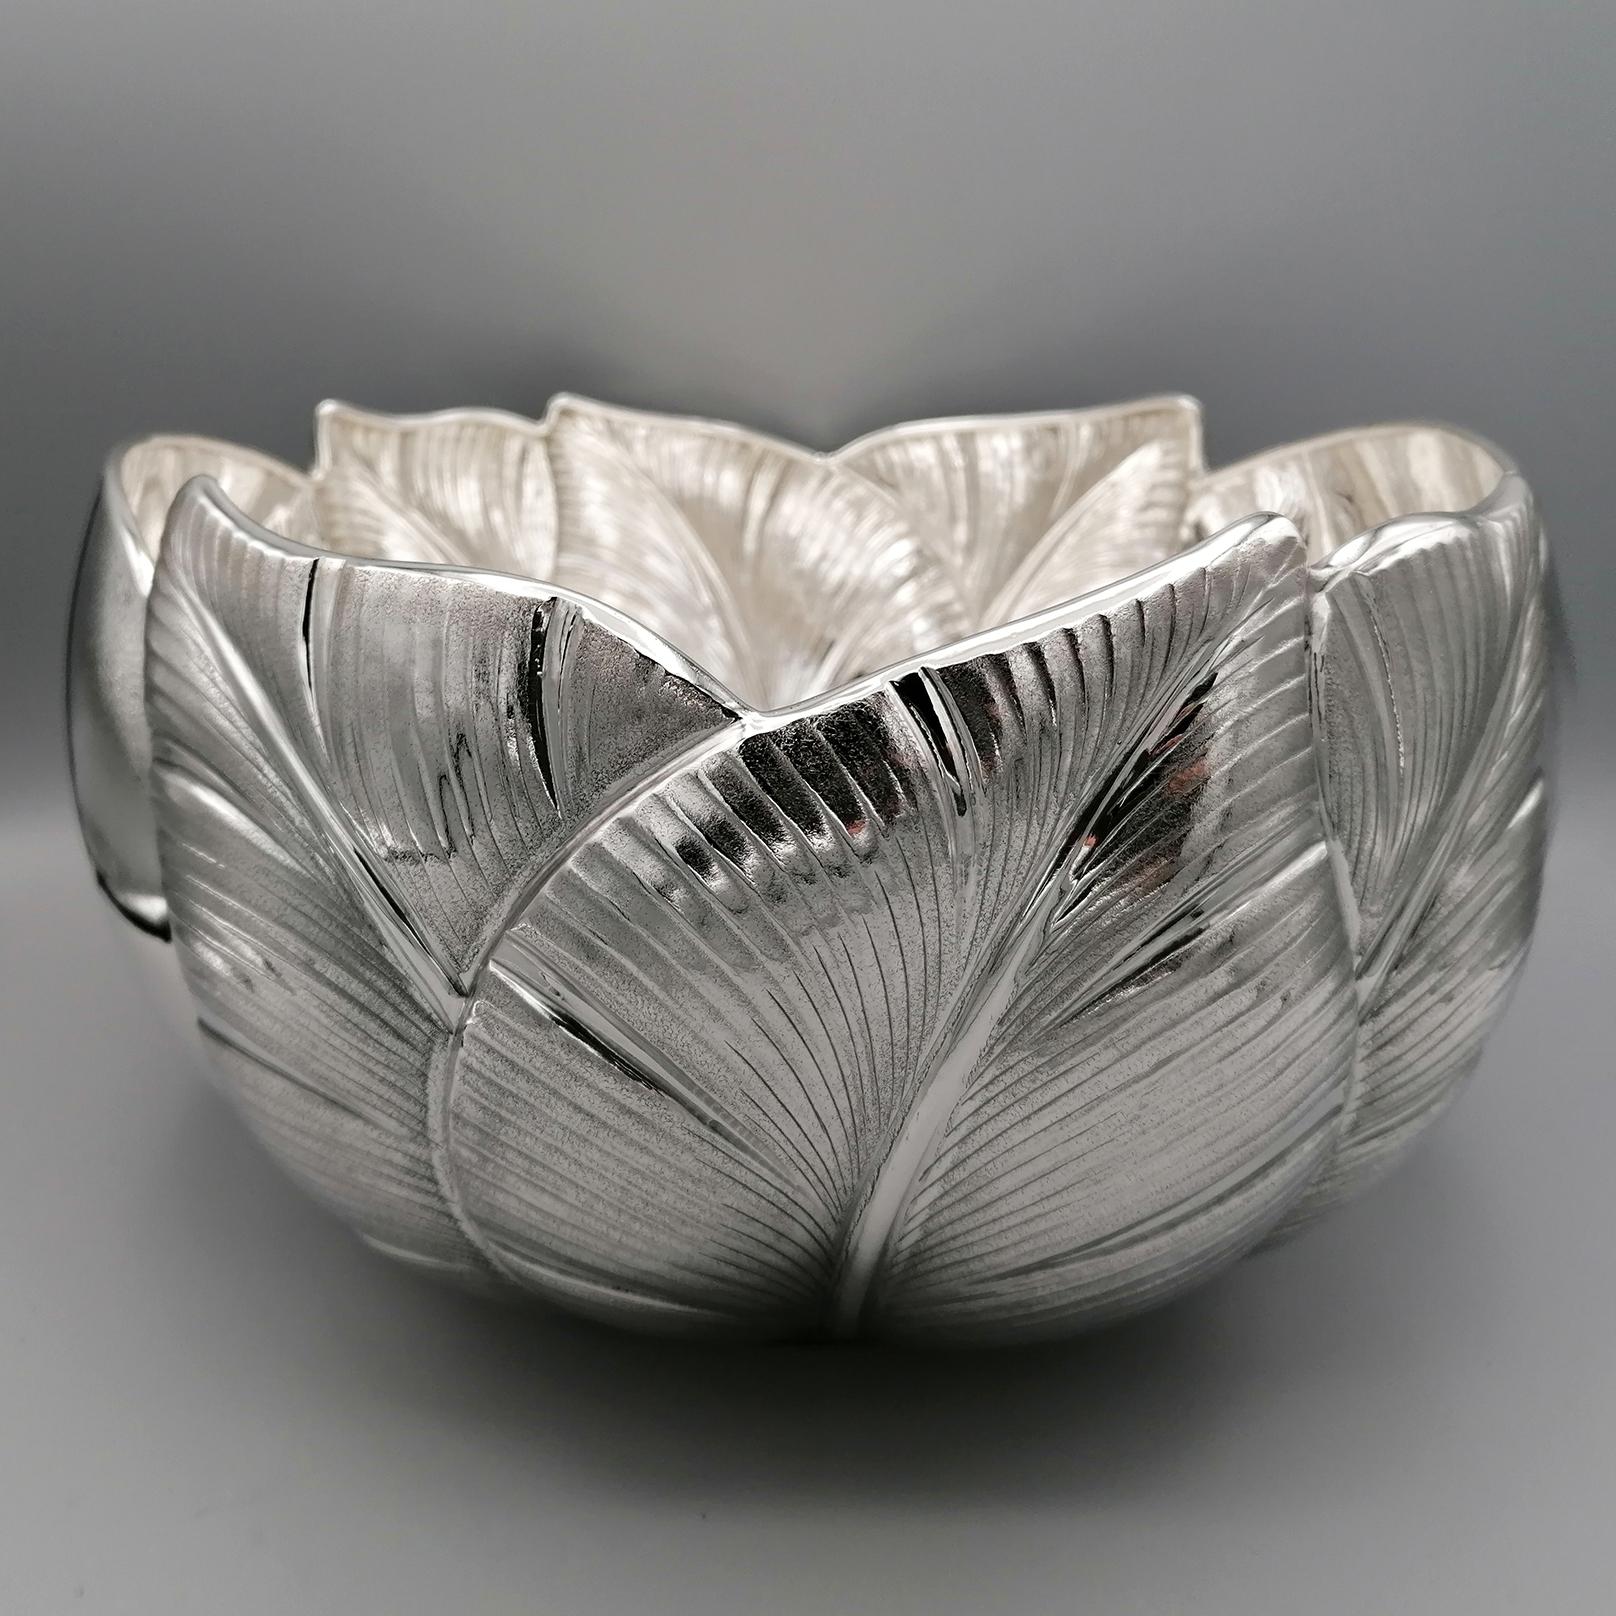 Solid sterling silver centerpiece. 
The shape of the body of the large bowl is round, rounded and shaped in the upper part to follow the design of the leaves. 
The leaf design was embossed and subsequently chiseled with a slight knurling to